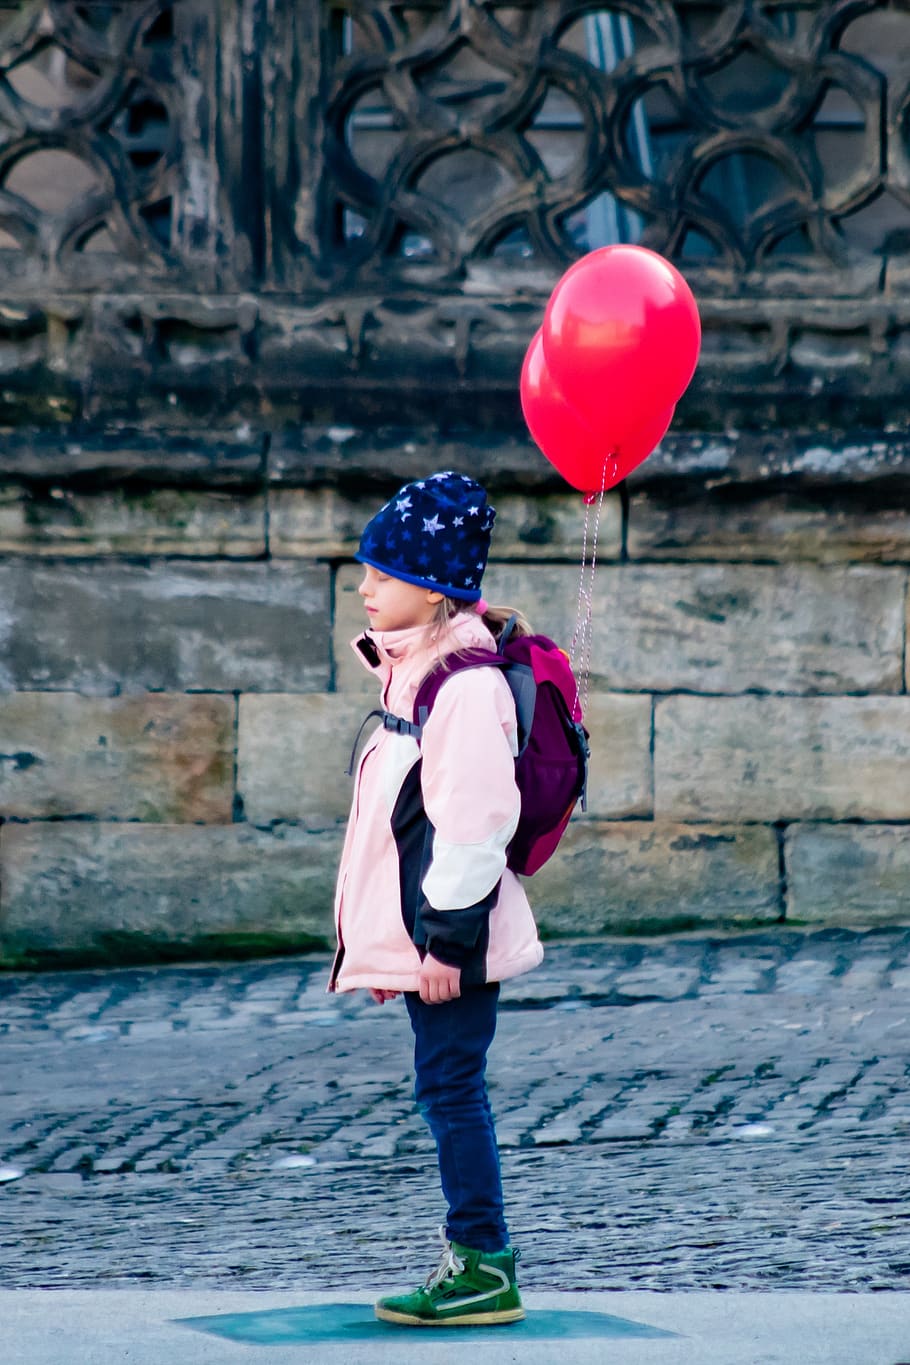 balloons, girl, dom, wish, thinking, balloon, one person, child, full length, real people